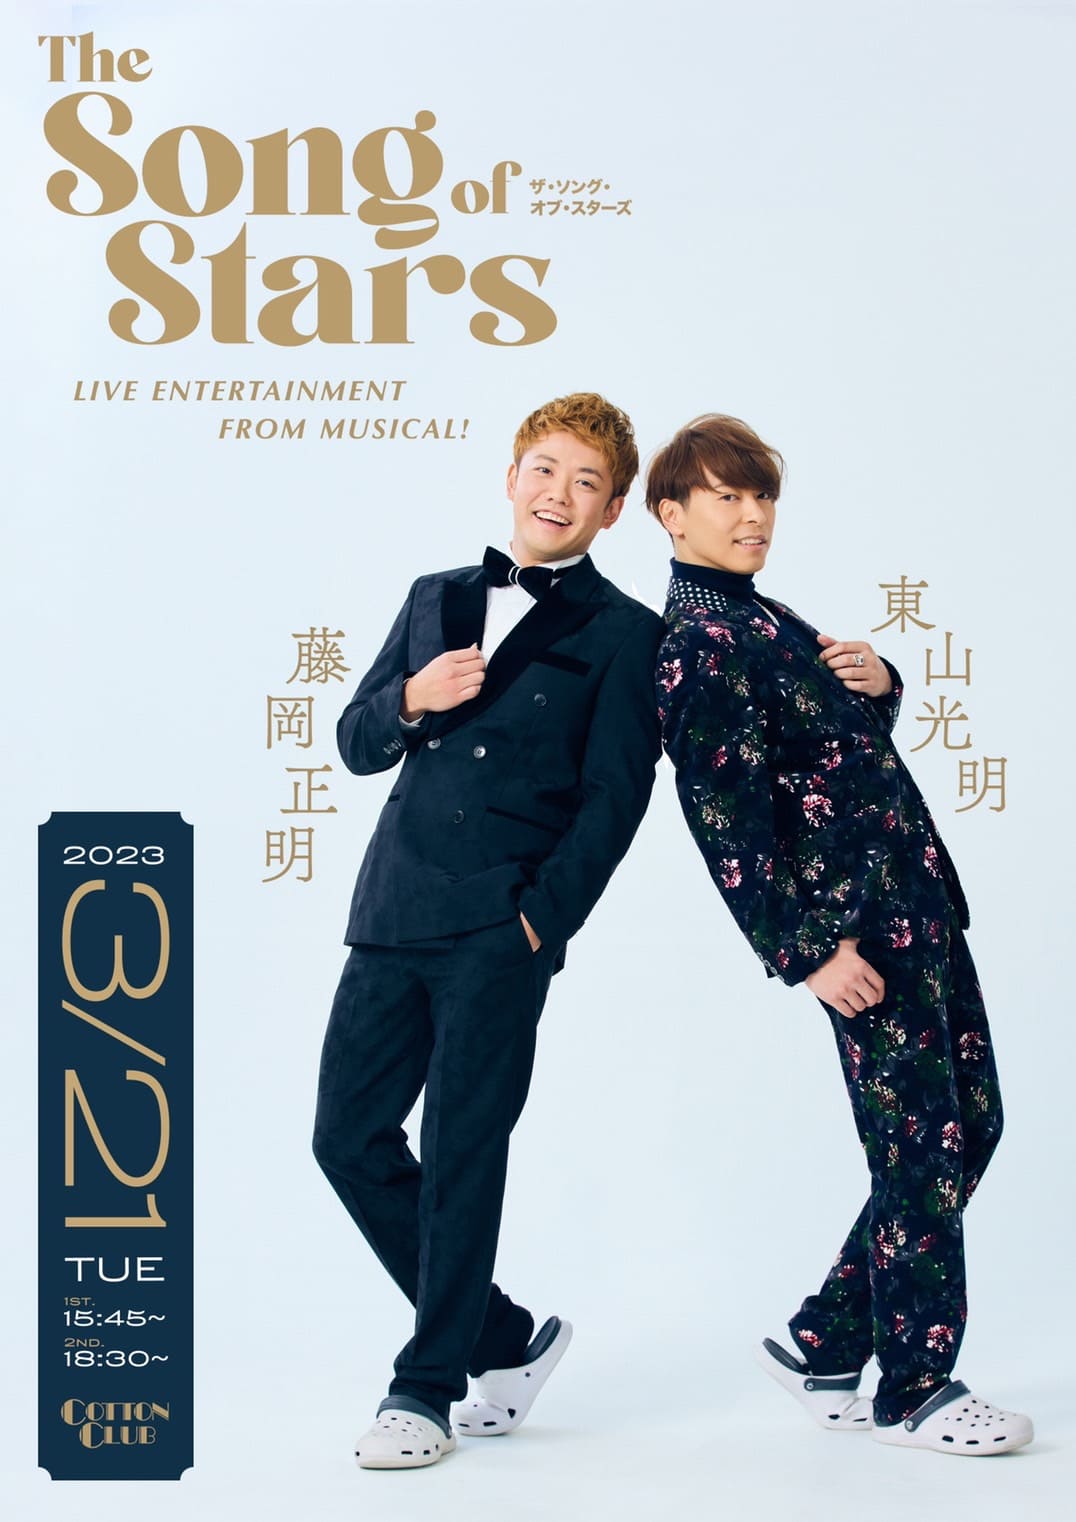 【3/21 1st.show】東山光明×藤岡正明『The Song of Stars』 ～Live Entertainment from Musical～